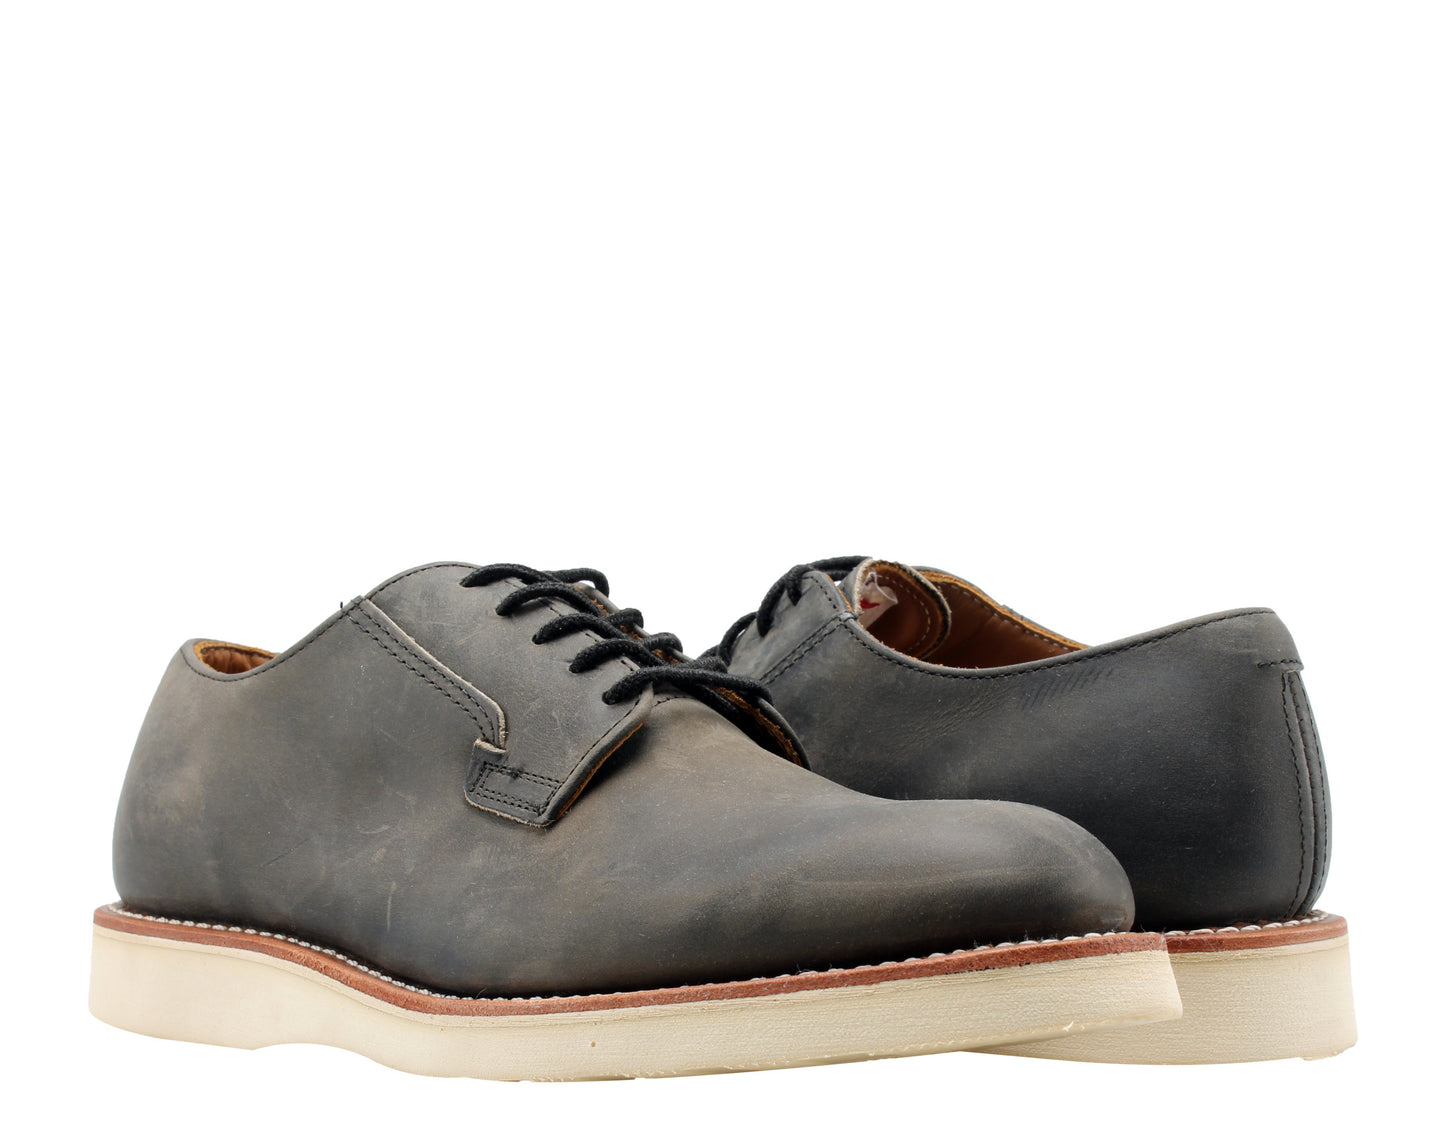 Red Wing Heritage Postman Oxford 3103 Men's Shoes